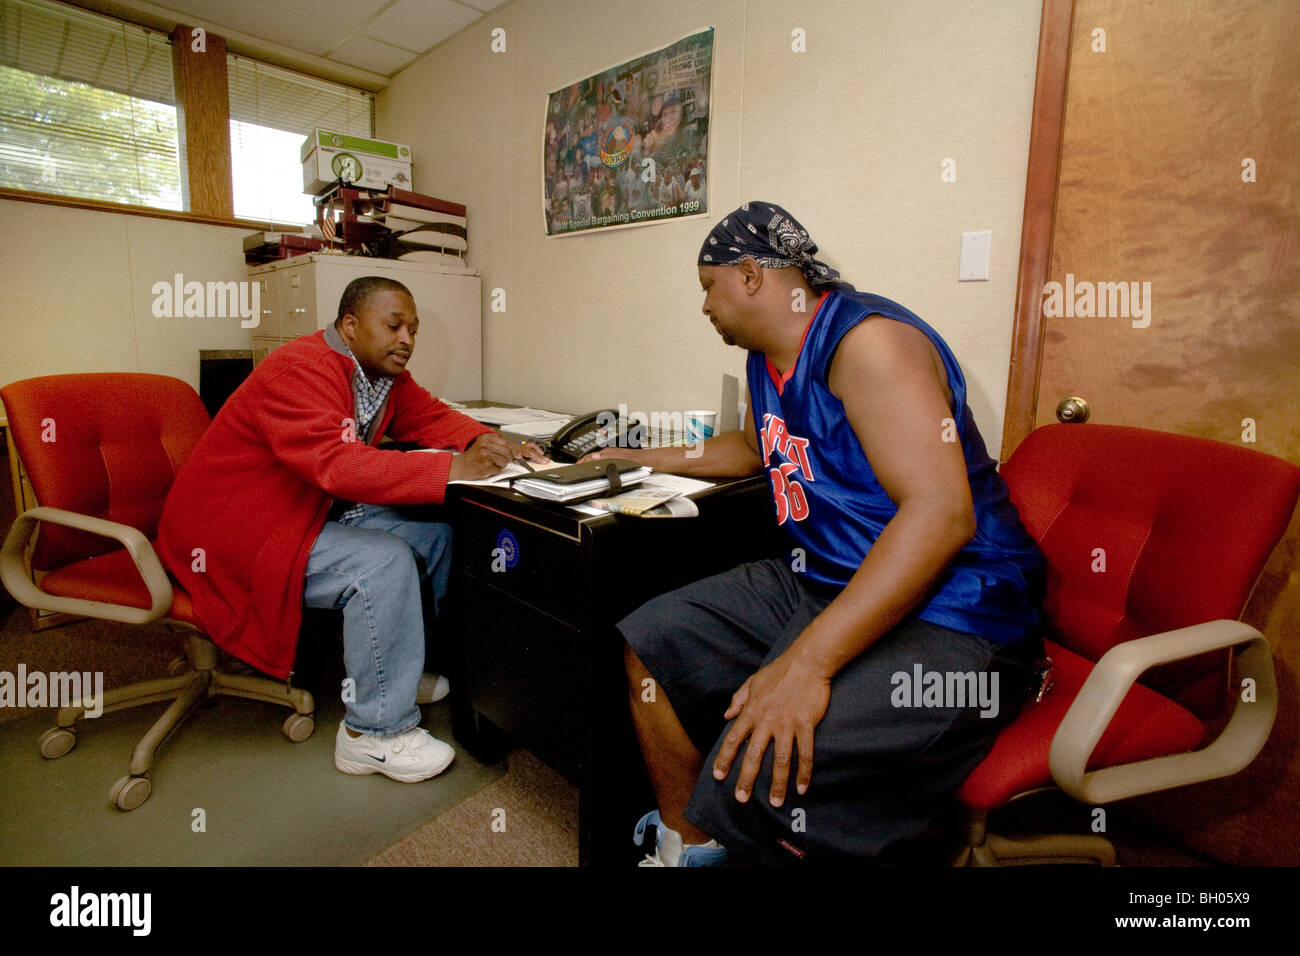 A United Auto Workers labor union volunteer peer counselor assists an unemployed member at a union local in Warren, Michigan. Stock Photo